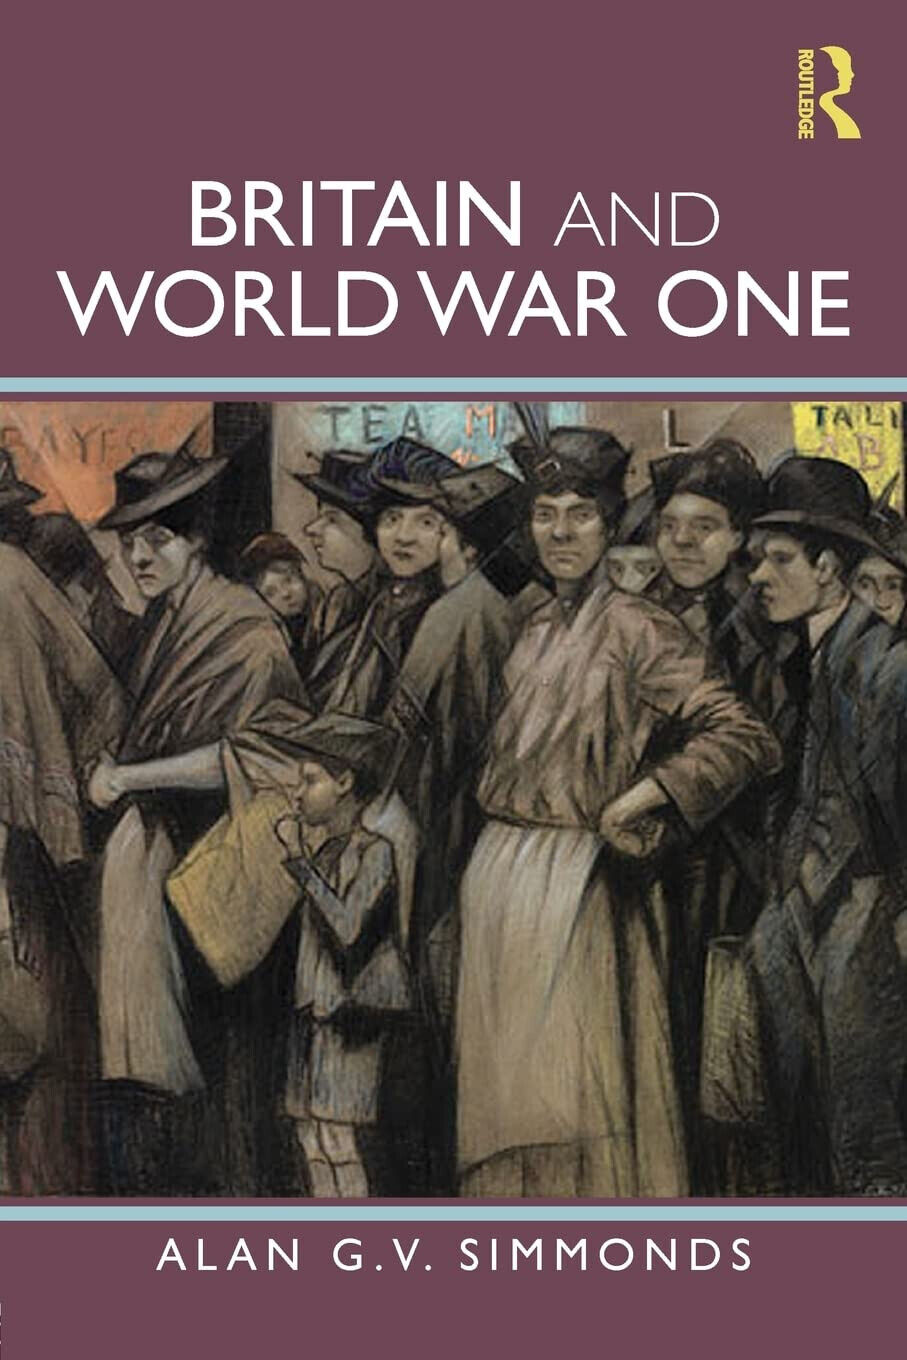 Britain and World War One -Alan G. V. - Routledge, 2011